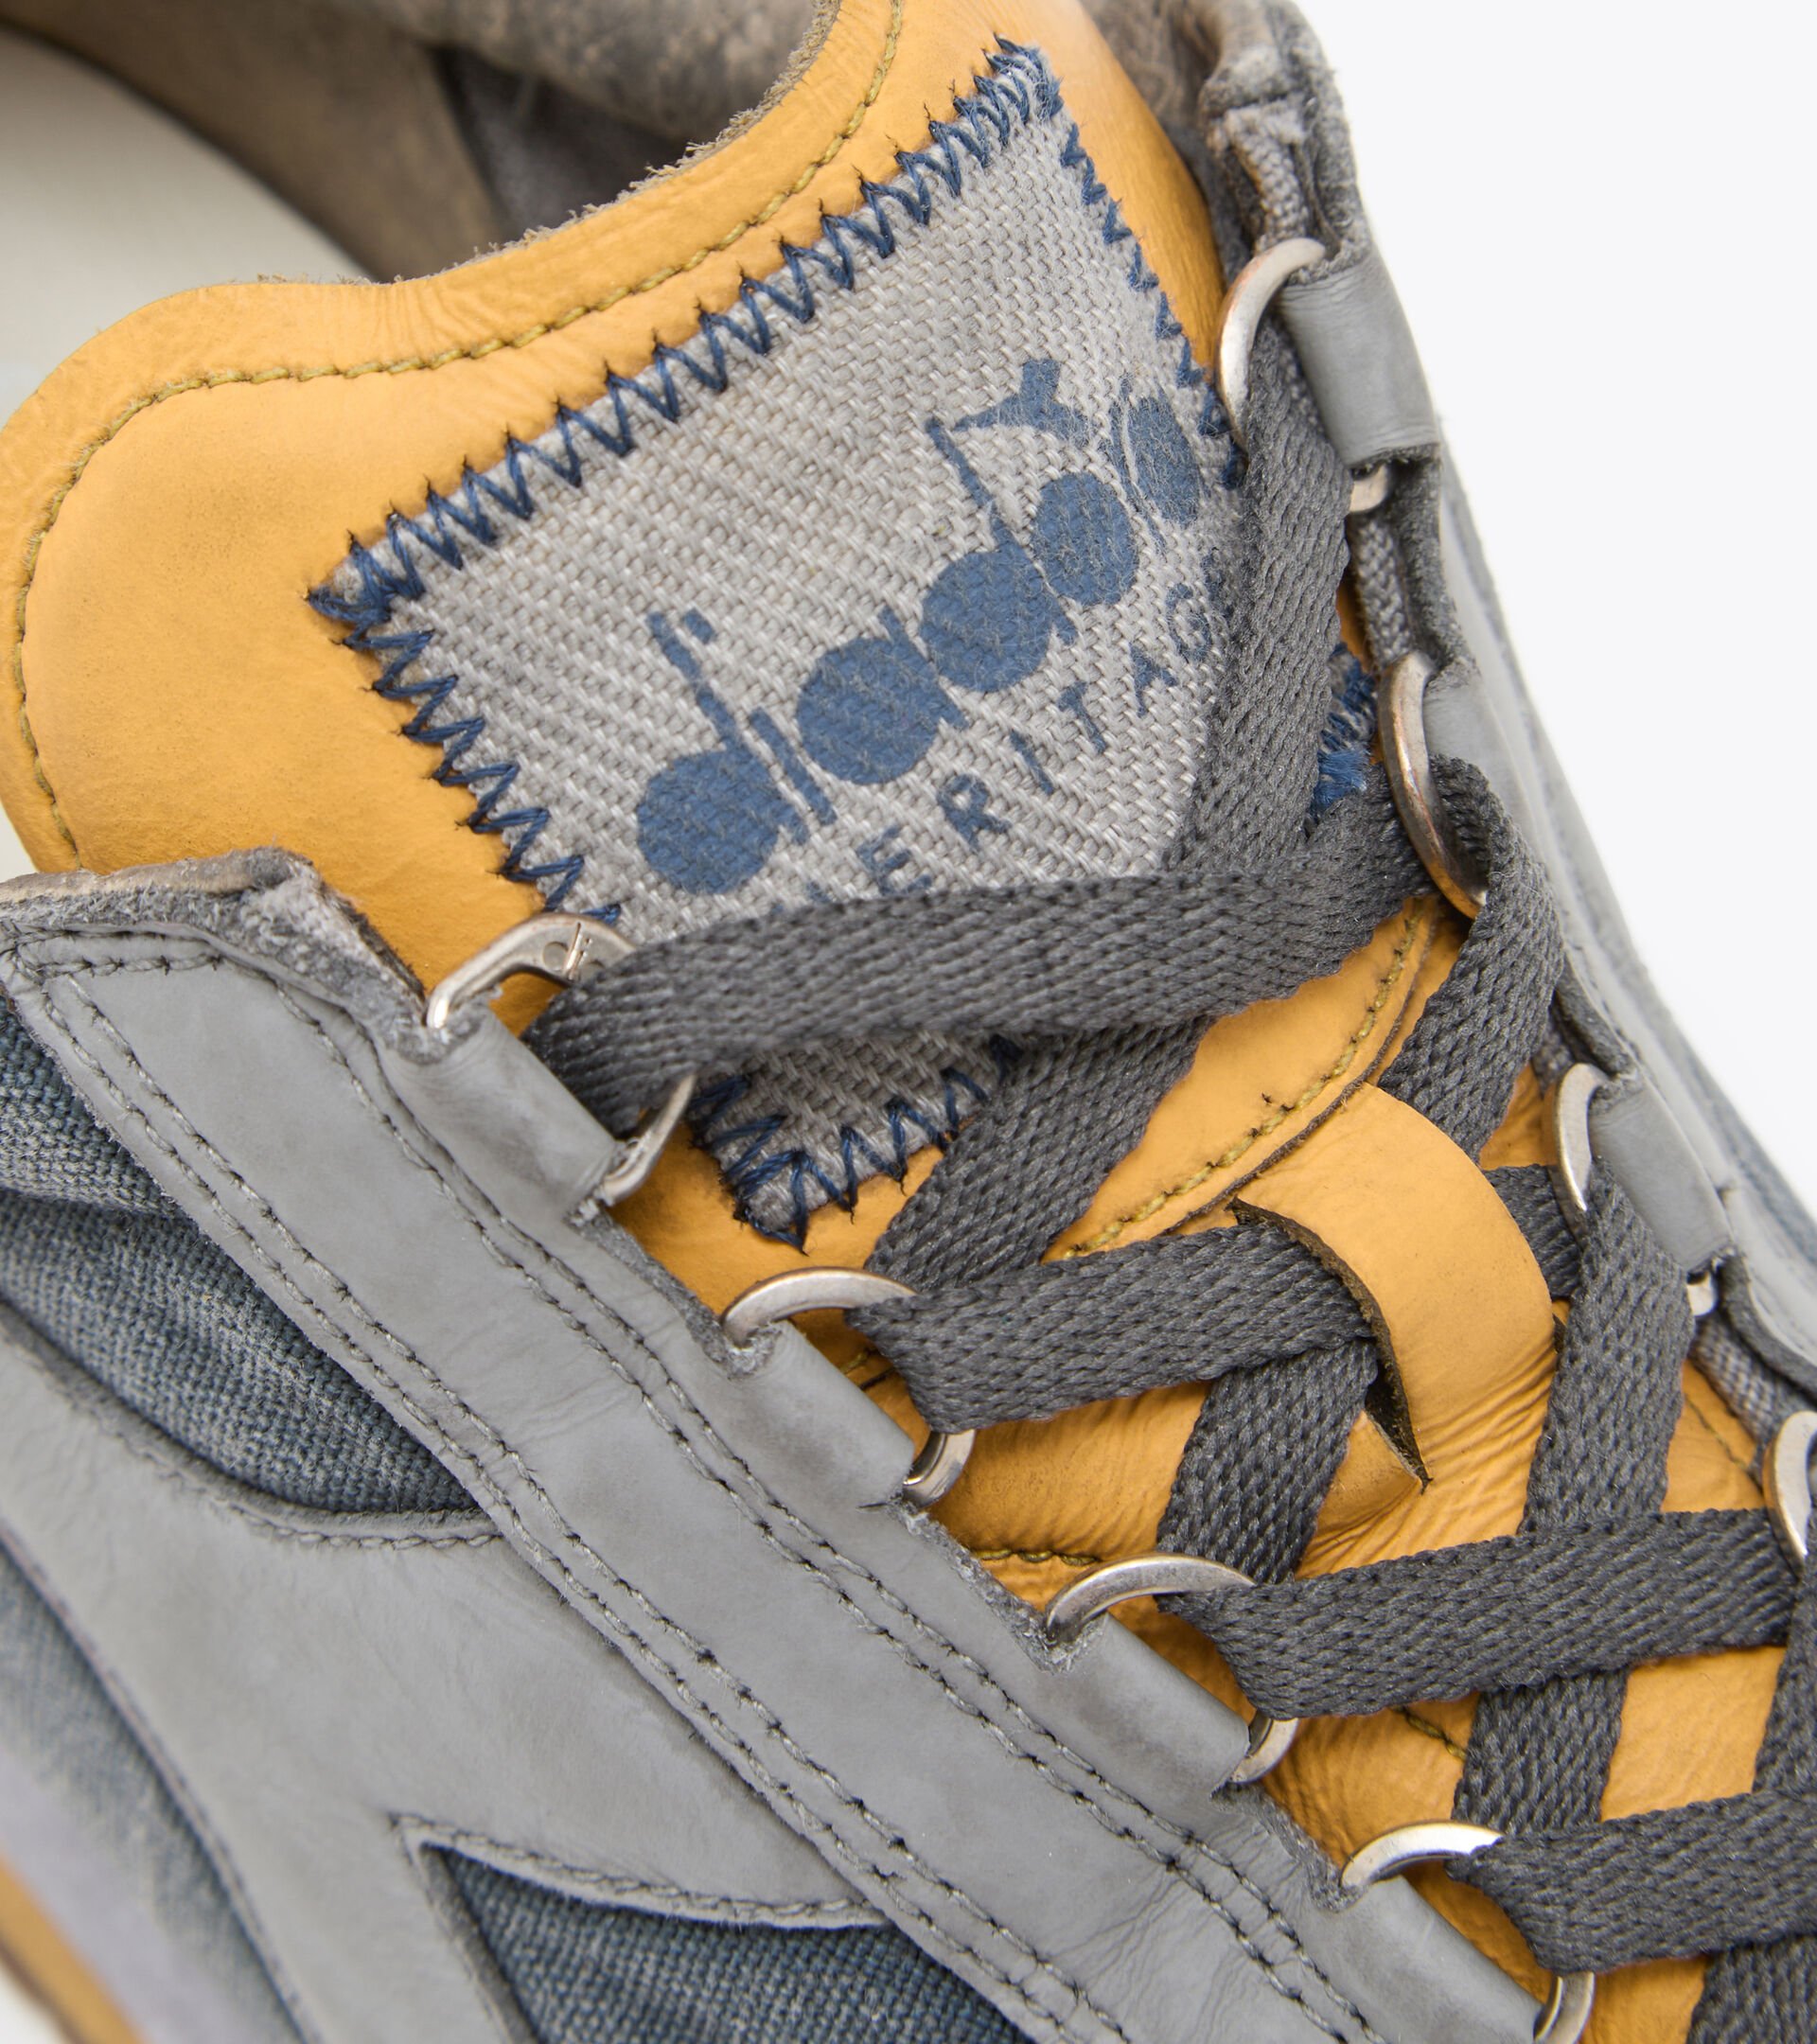 Chaussures Heritage - Gender neutral EQUIPE H DIRTY STONE WASH EVO BLEU MER BERING/GRIS COLOMBE - Diadora